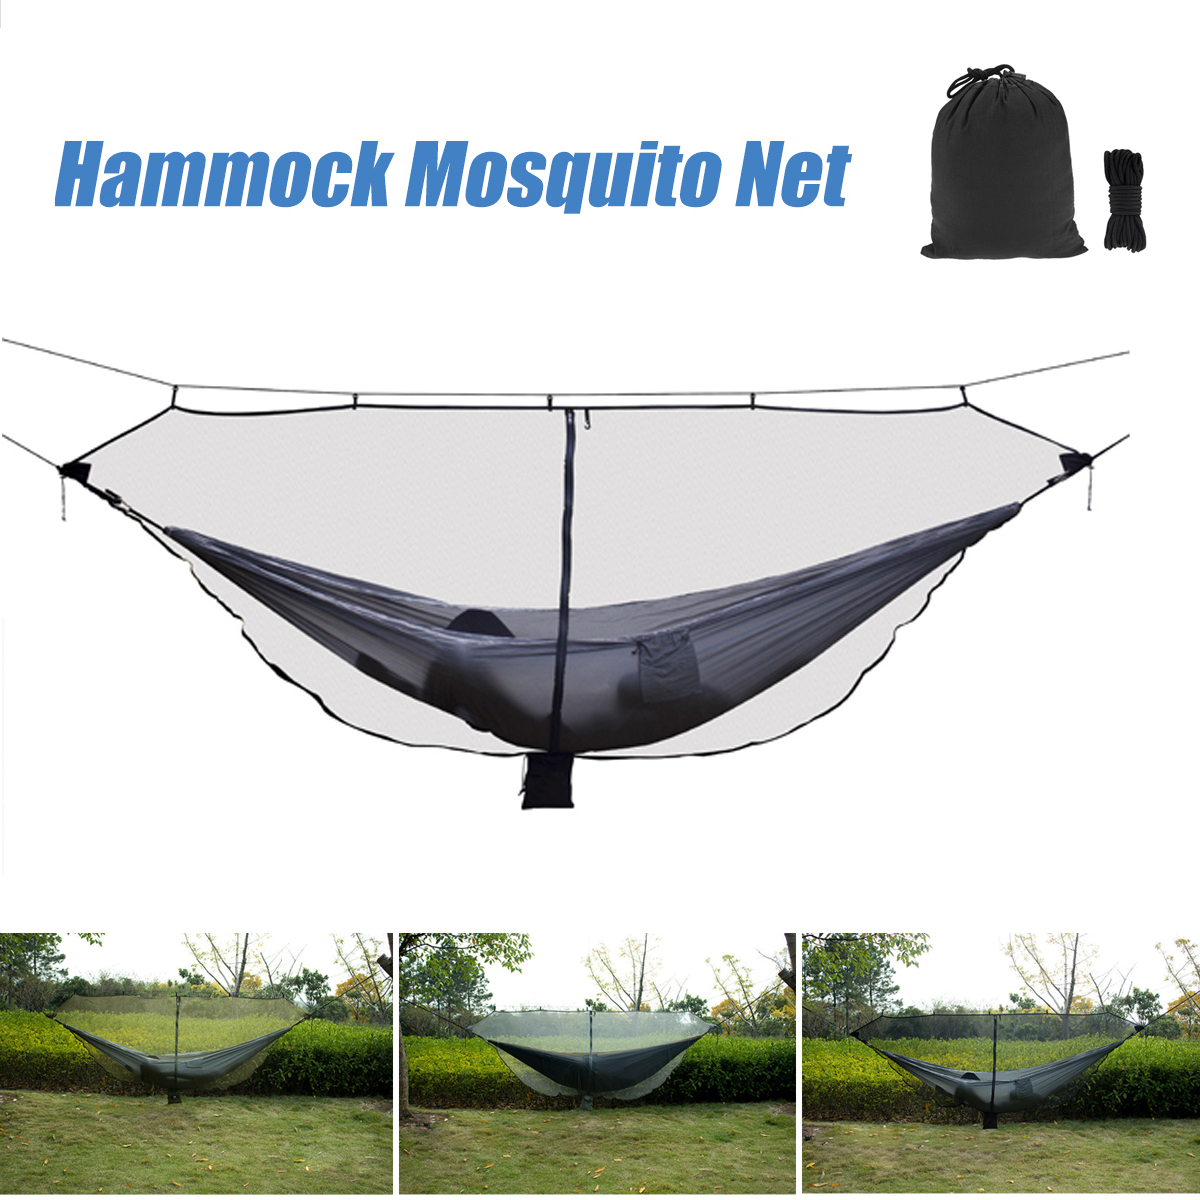 Outdoor-Portable-Hammock-Mosquito-Insect-Net-Camping-Swing-Bed-Gauze-Protection-1336853-1